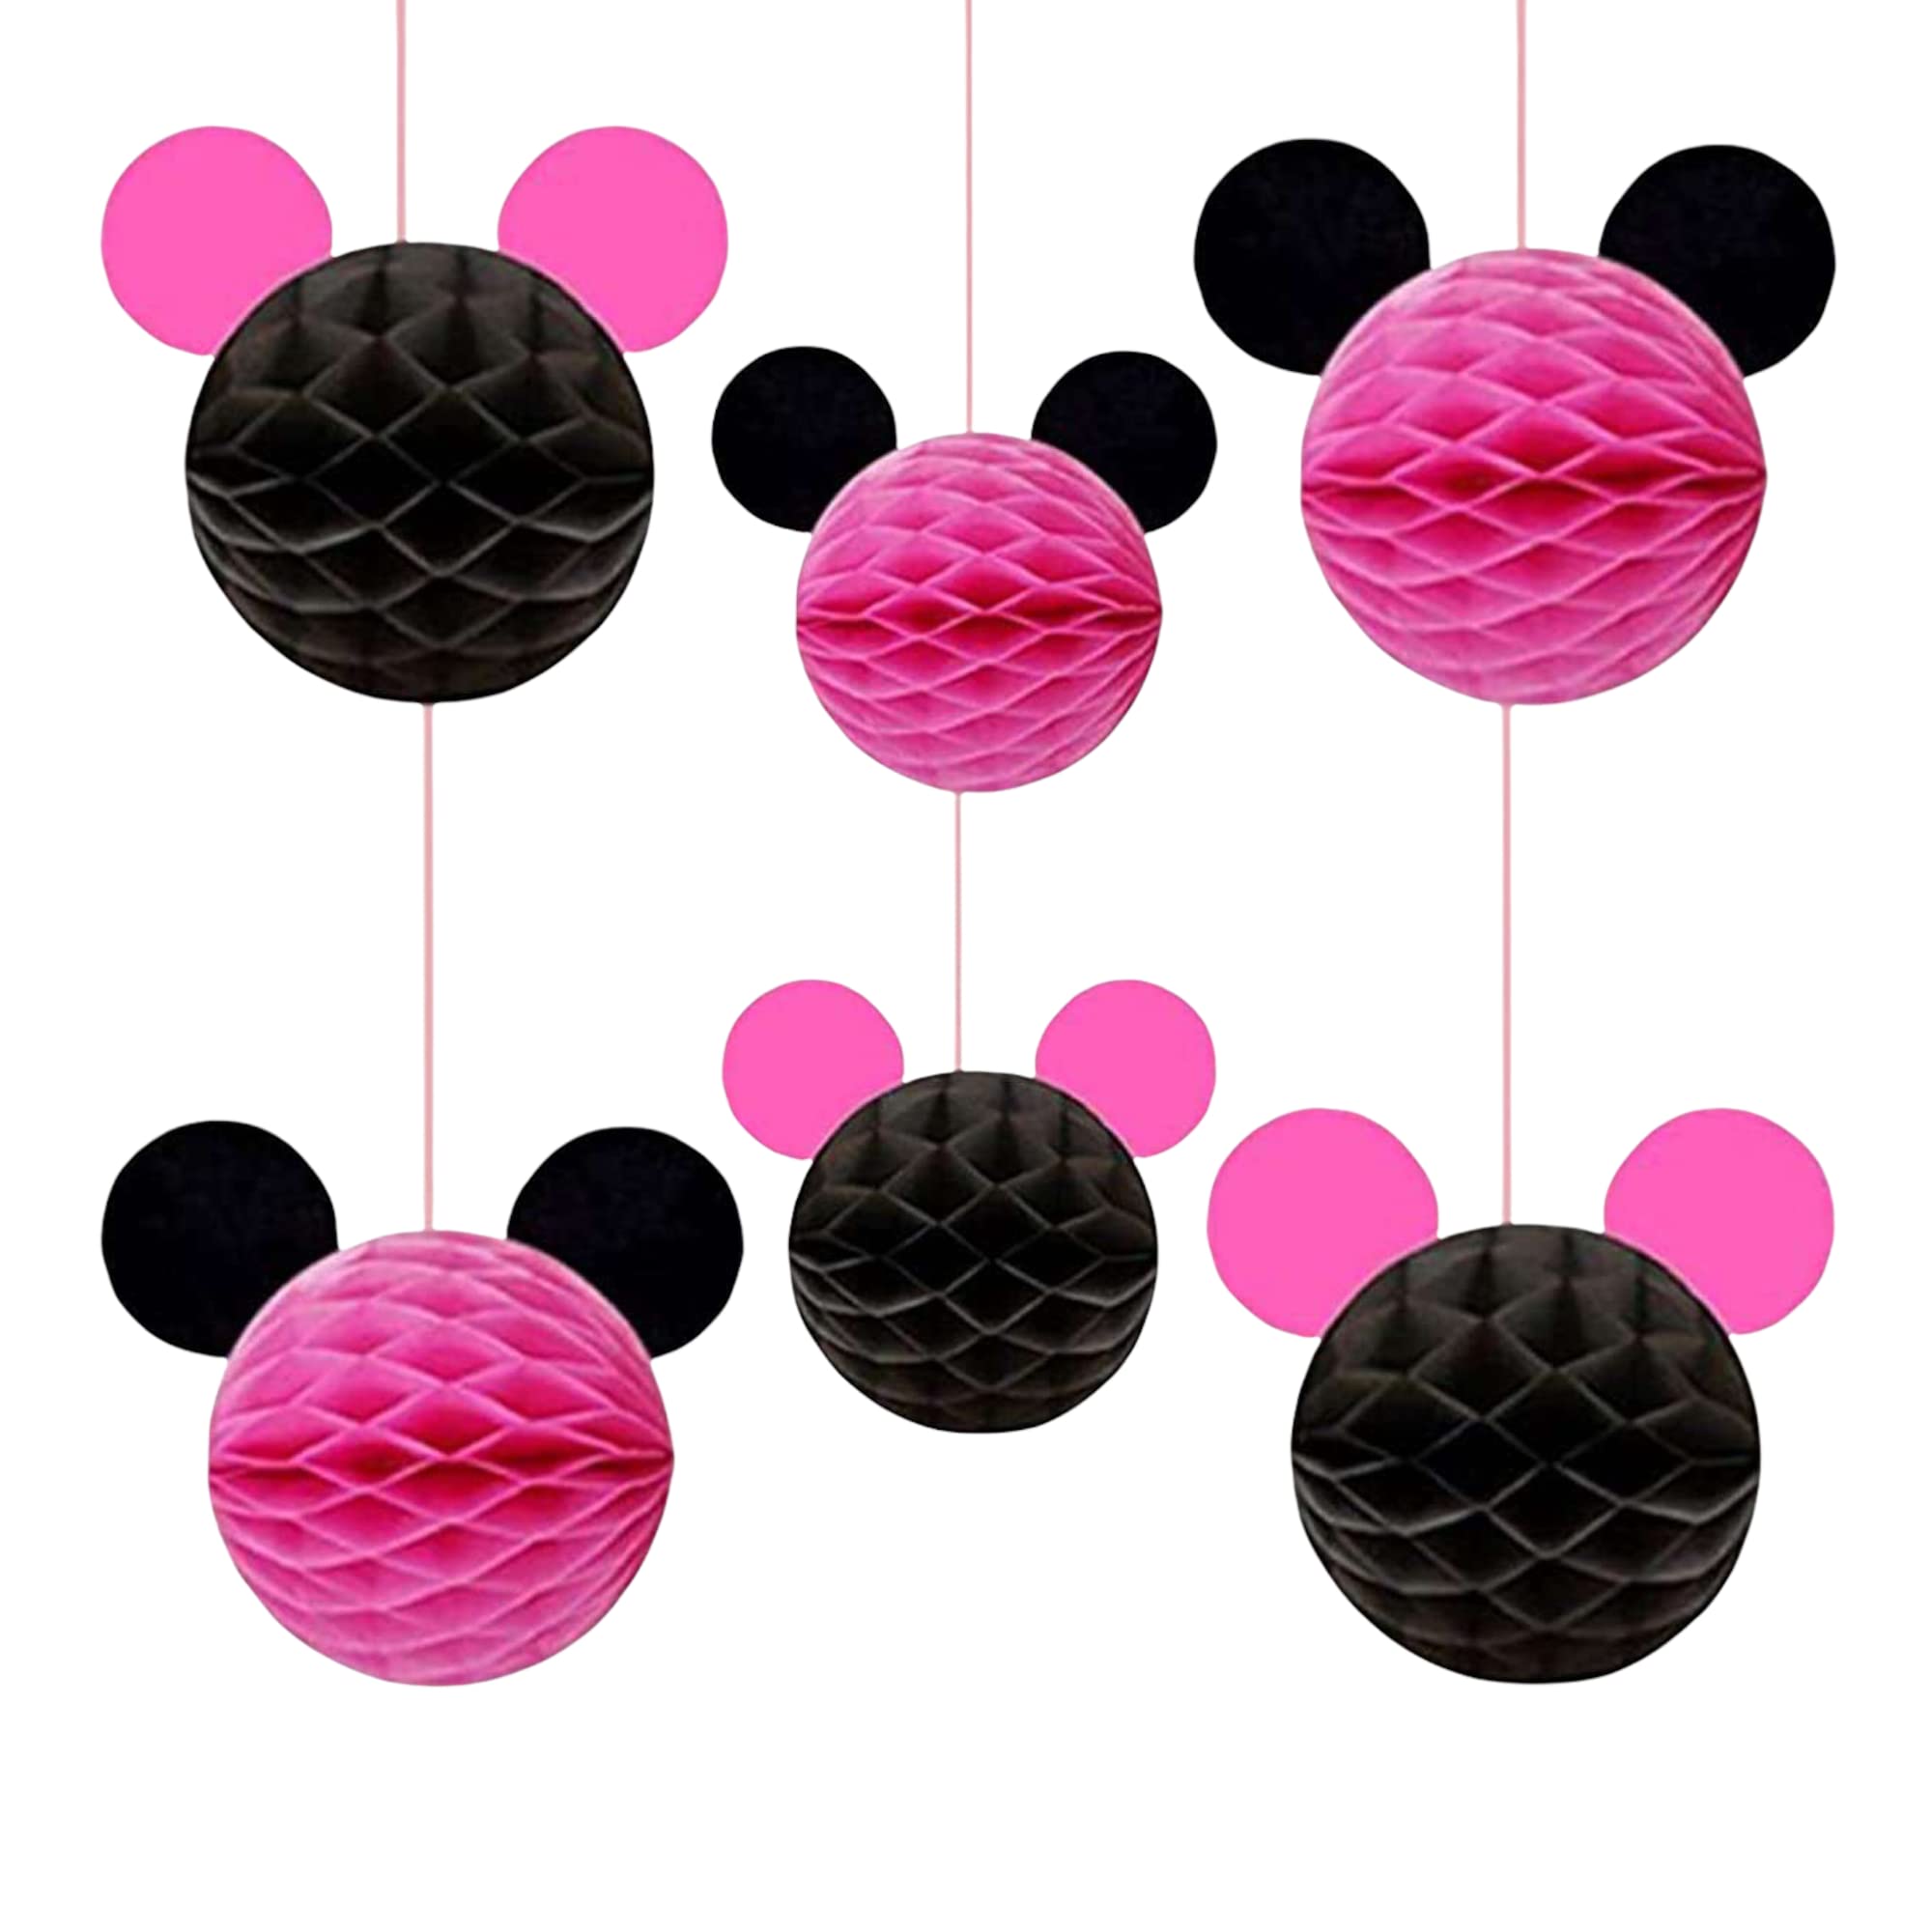 Minnie Birthday Party Decorations - Minnie Inspired Honeycomb Hanging Mouse Ears - Cartoon Mouse Birthday Decorations - 6 Minnie Honeycomb Balls by Jolly Jon (Honeycomb Only)